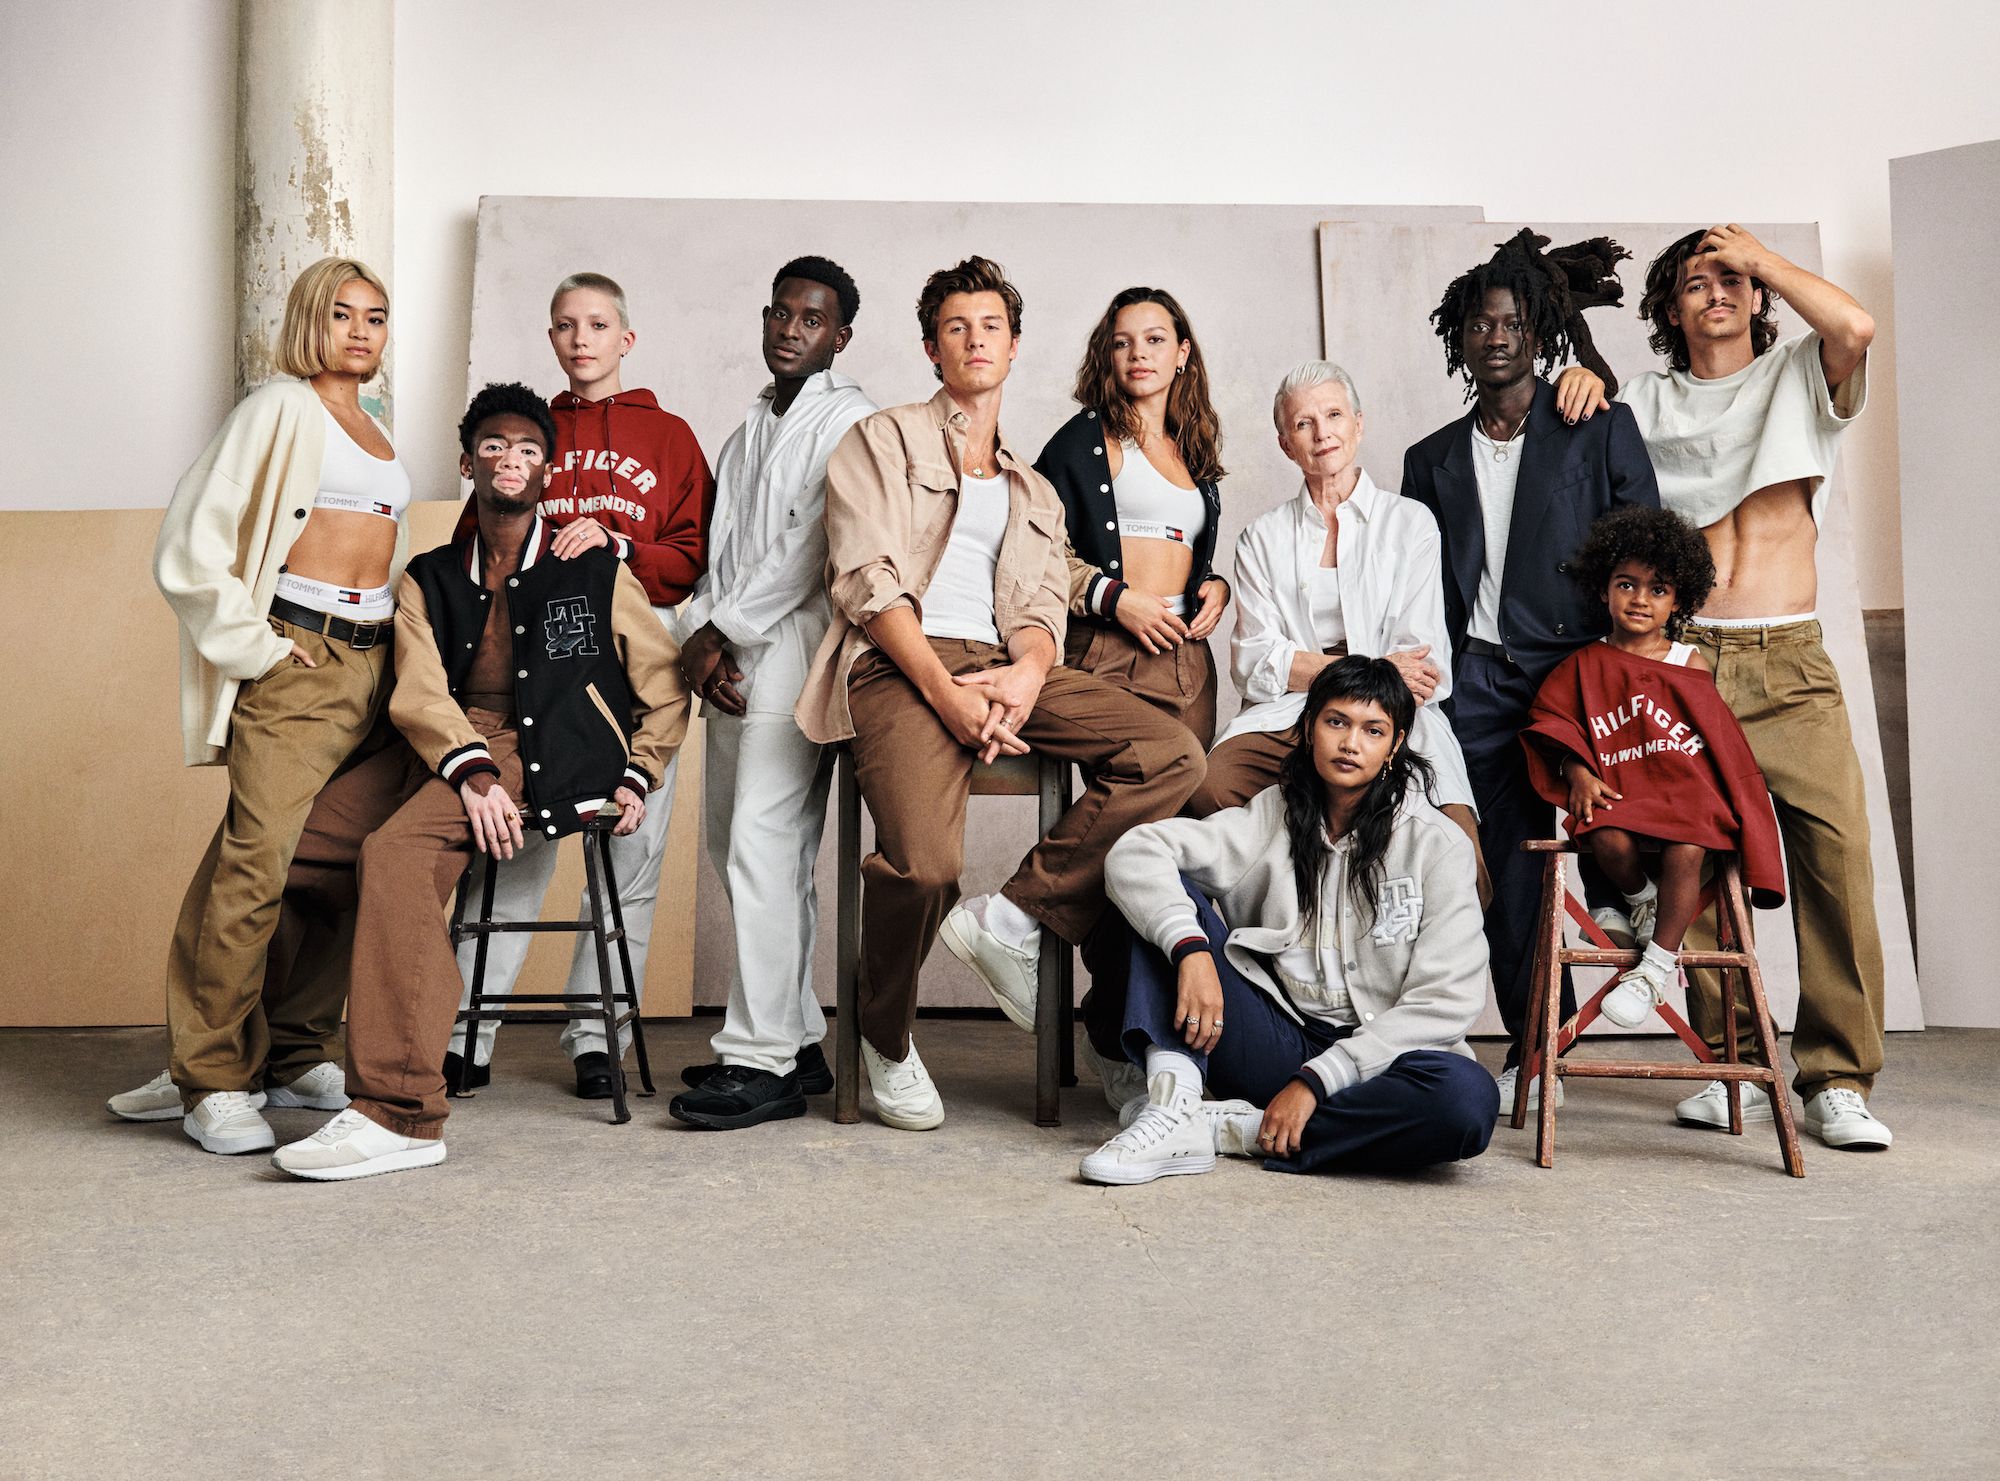 Latest Tommy Hilfiger Collection You're Going to Love